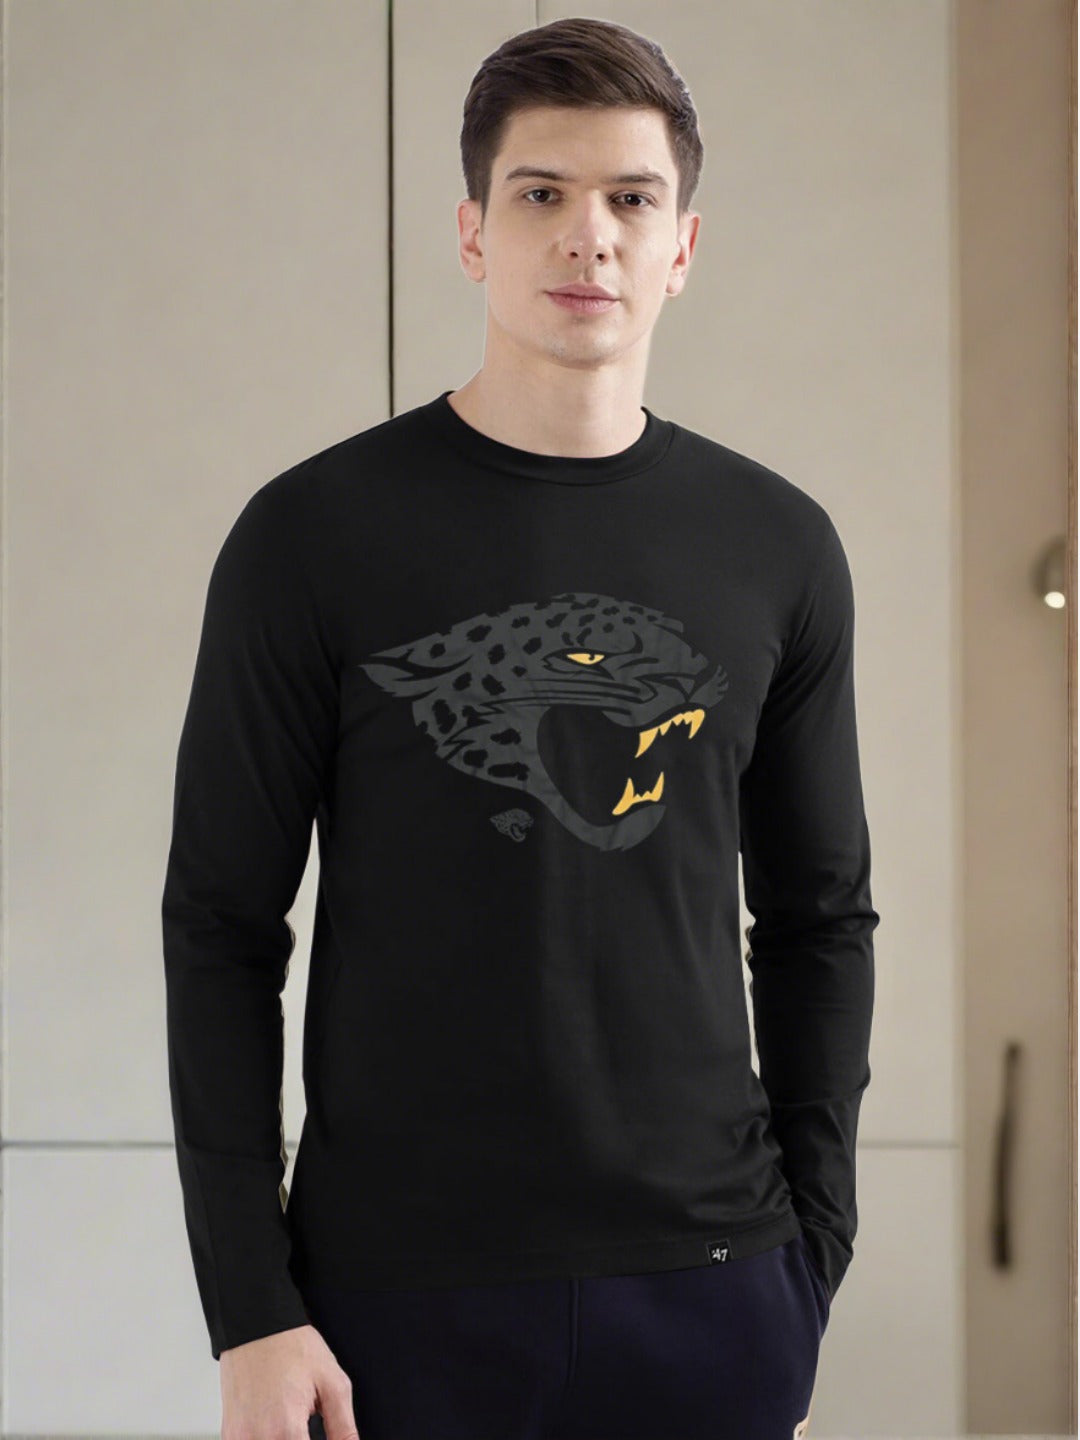 47 Single Jersey Crew Neck Long Sleeve Shirt For Men-Black with Print-SP1949